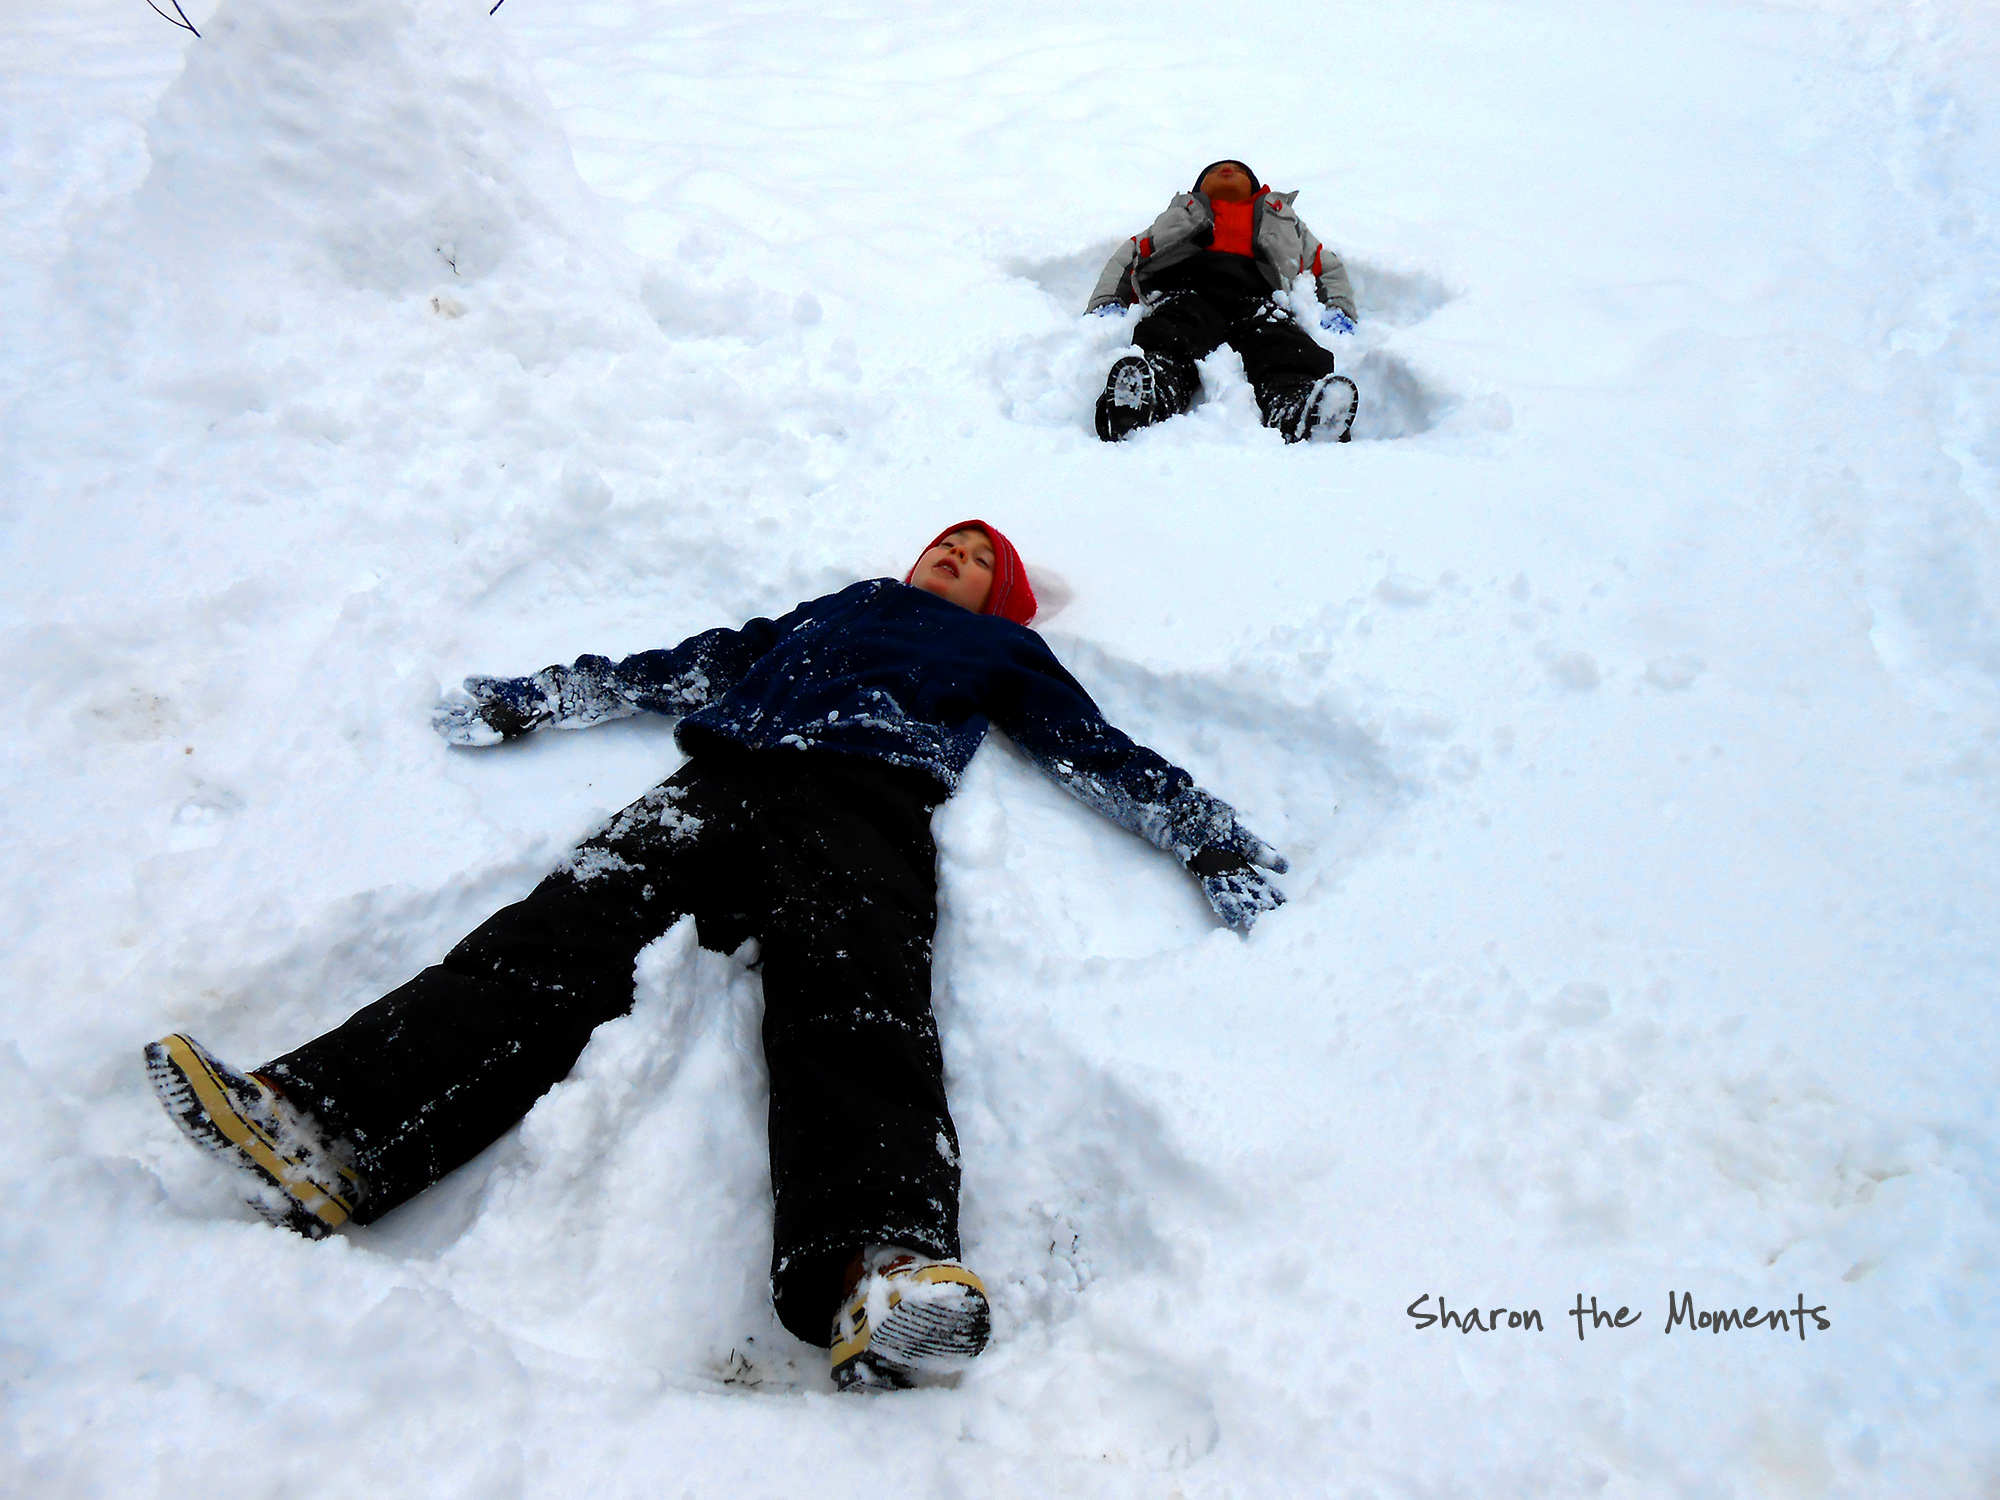 Snow Day for Making Mini Sledding Hills and Snow Angels|Sharon the Moments blog